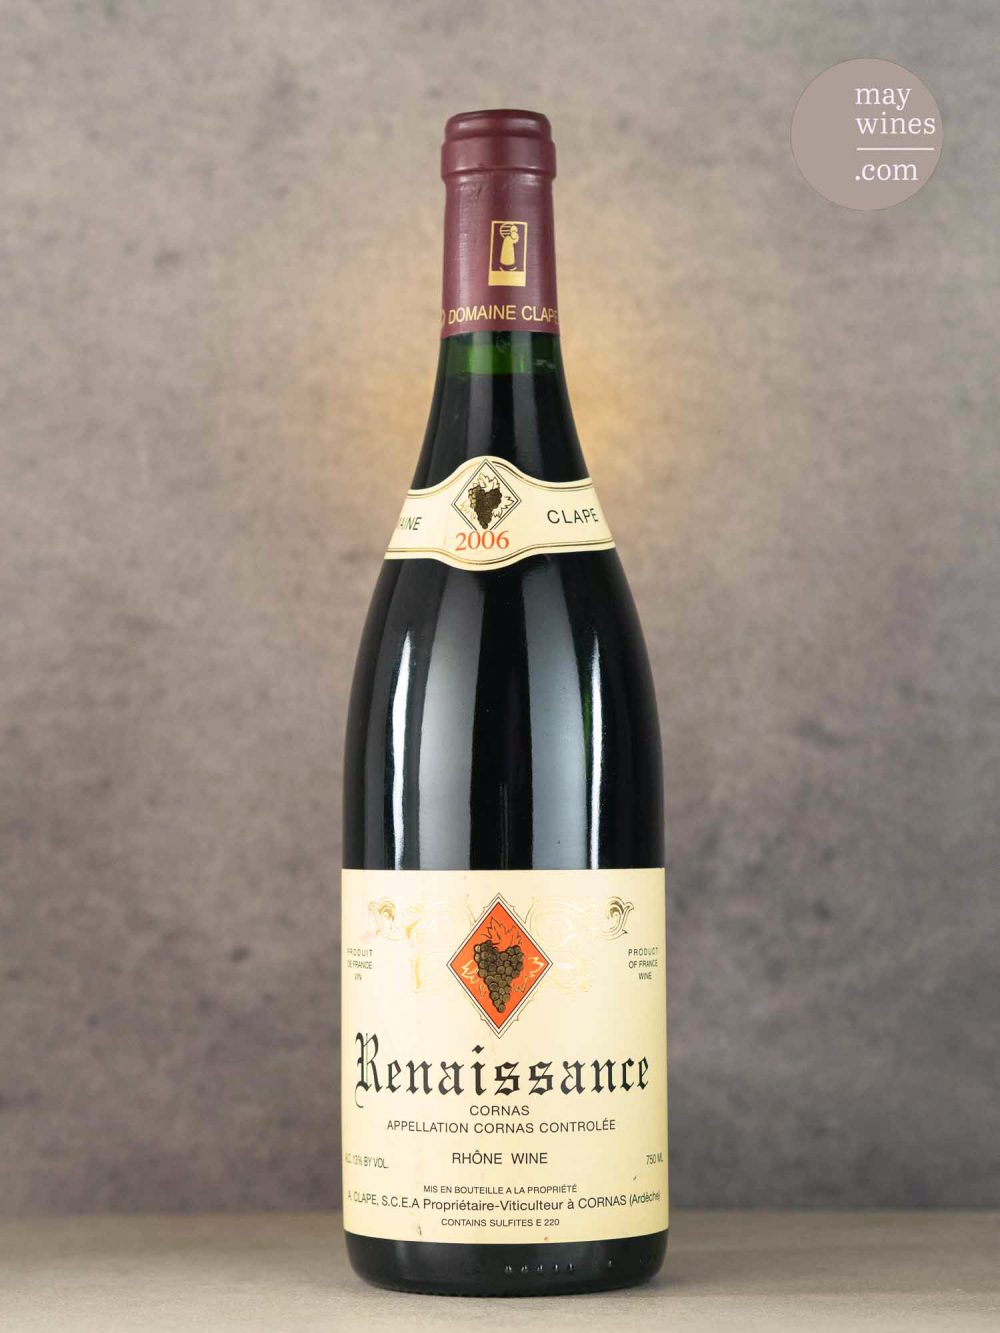 May Wines – Rotwein – 2006 Renaissance - Domaine Clape